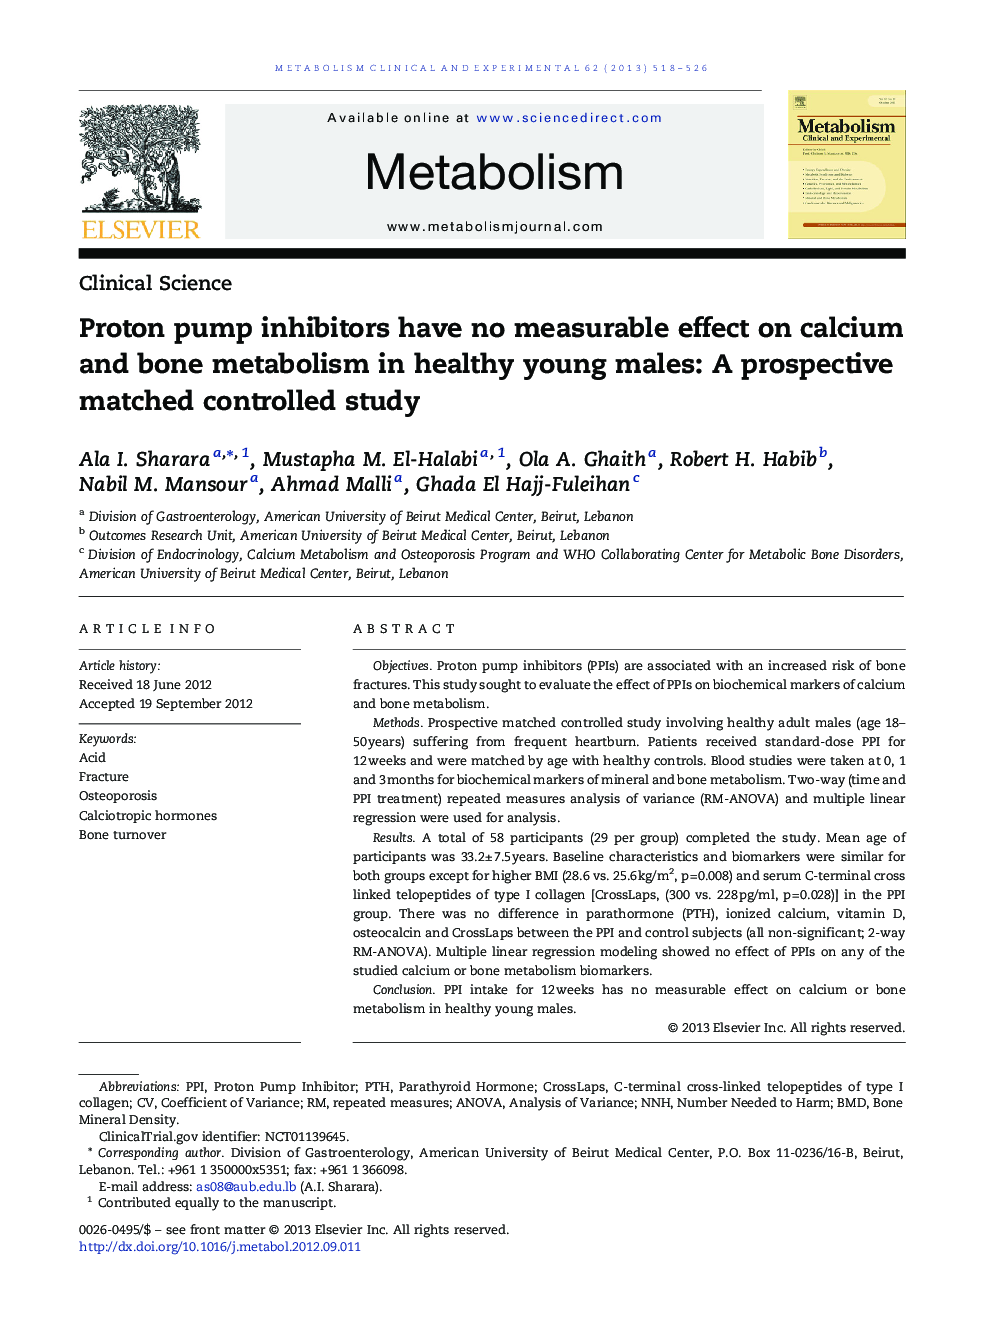 Proton pump inhibitors have no measurable effect on calcium and bone metabolism in healthy young males: A prospective matched controlled study 